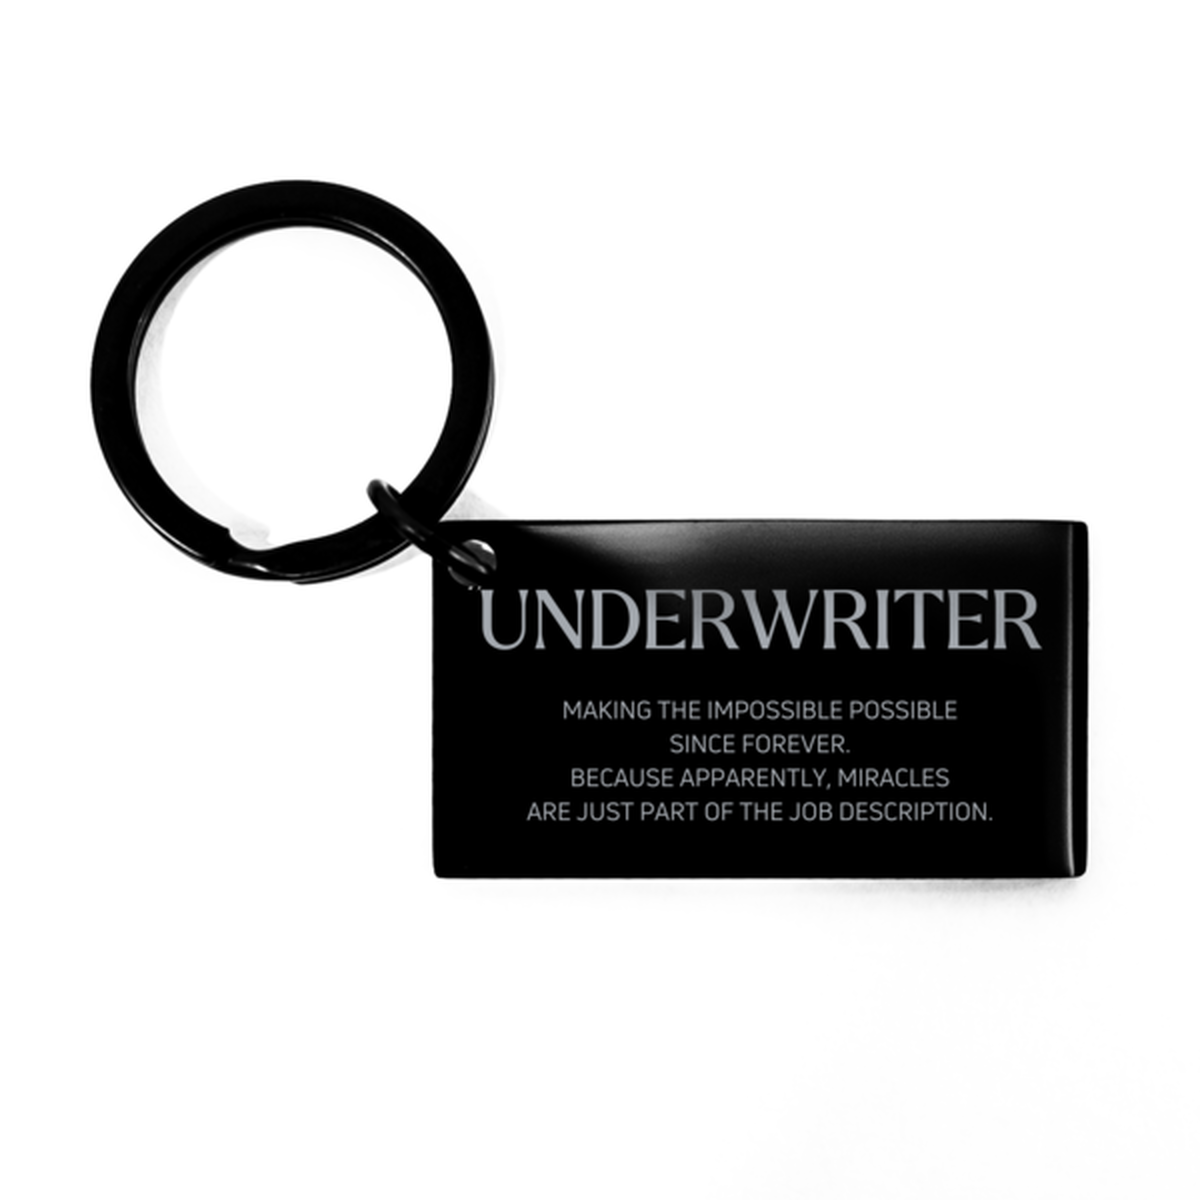 Funny Underwriter Gifts, Miracles are just part of the job description, Inspirational Birthday Keychain For Underwriter, Men, Women, Coworkers, Friends, Boss